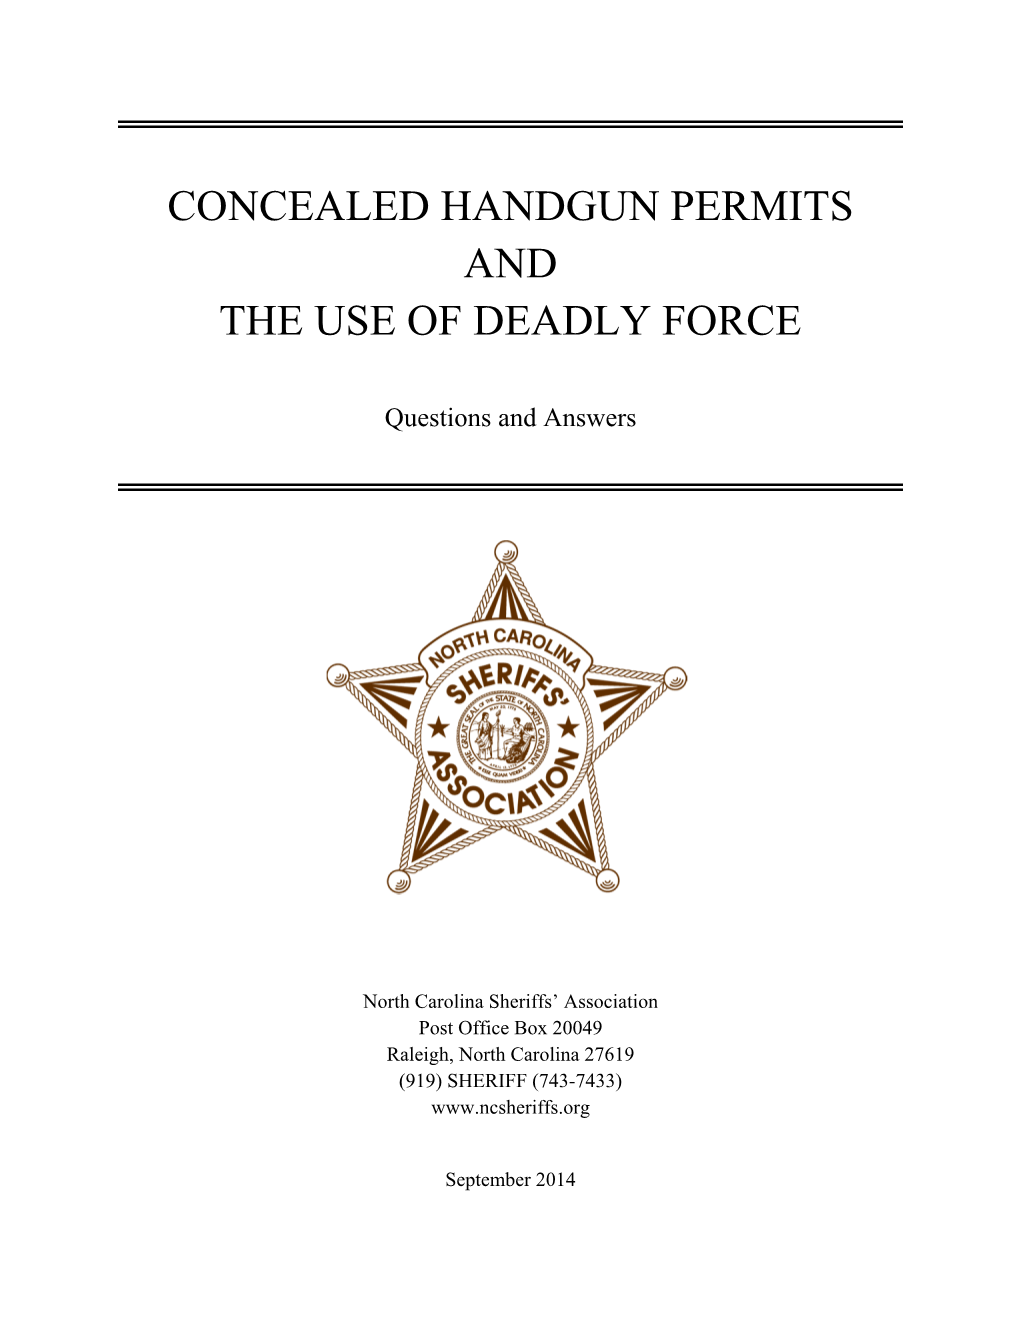 Updated Concealed Handgun Permits and the Use of Deadly Force